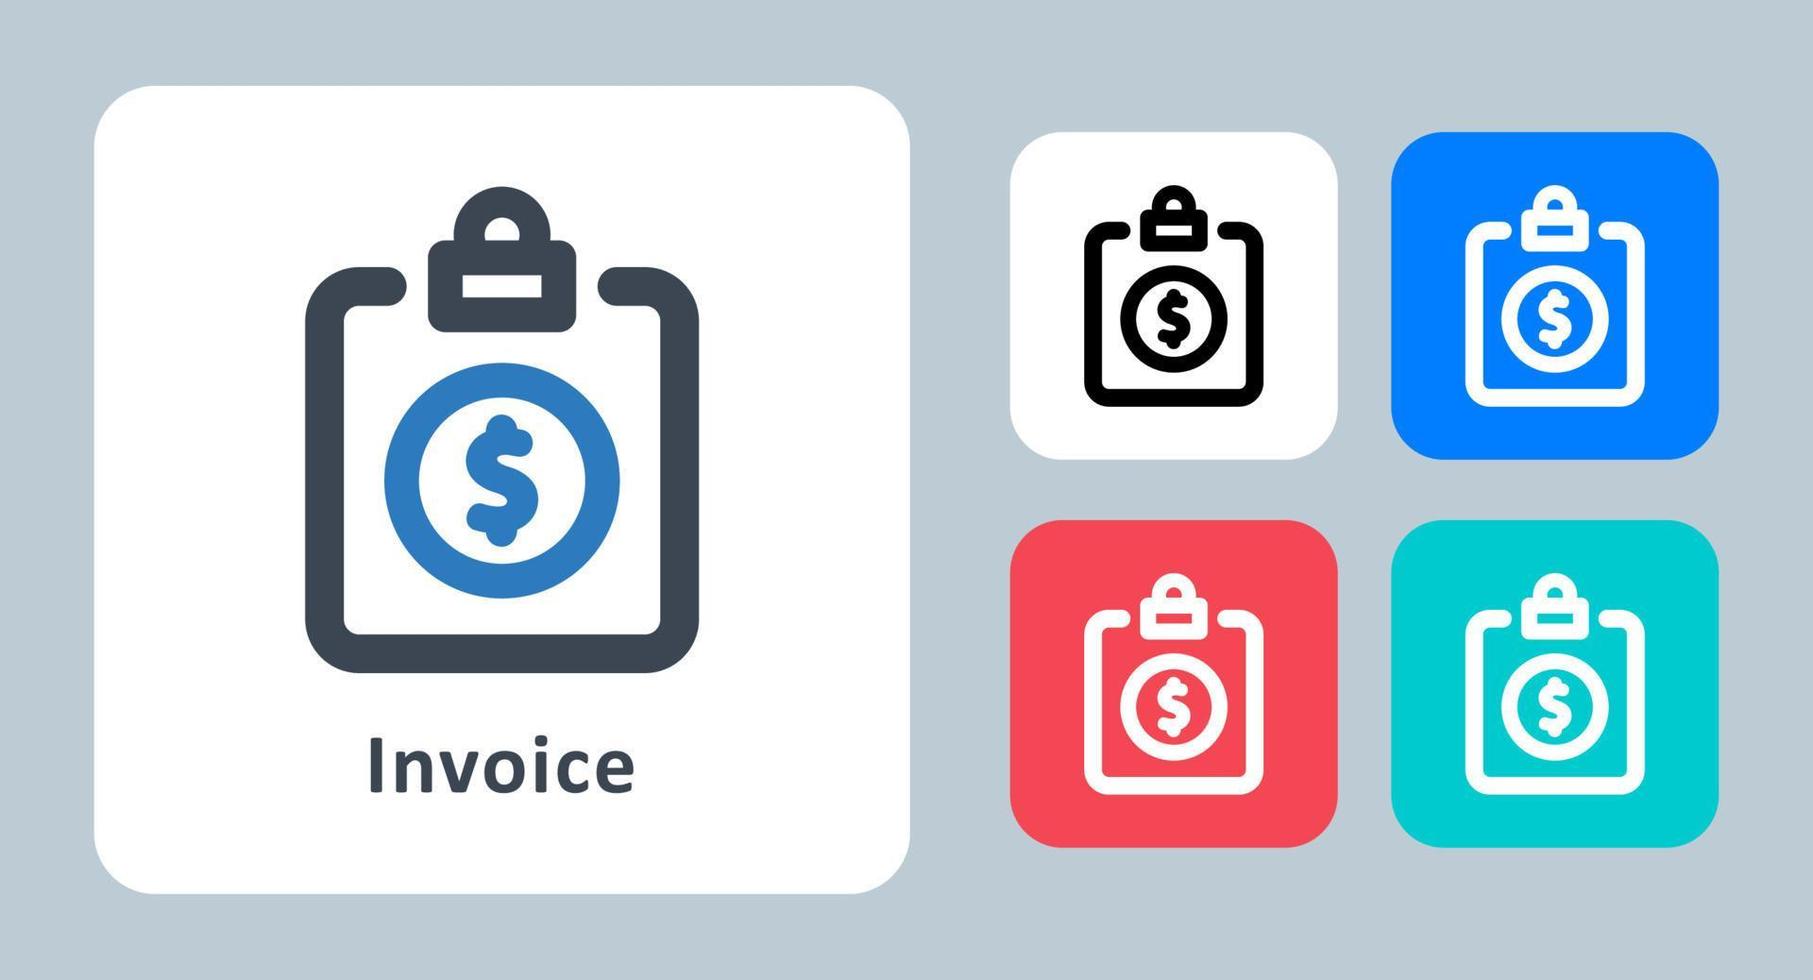 Invoice icon - vector illustration . Financial, Report, Bill, Invoice, Business, Tax, Receipt, payment, line, outline, flat, icons .